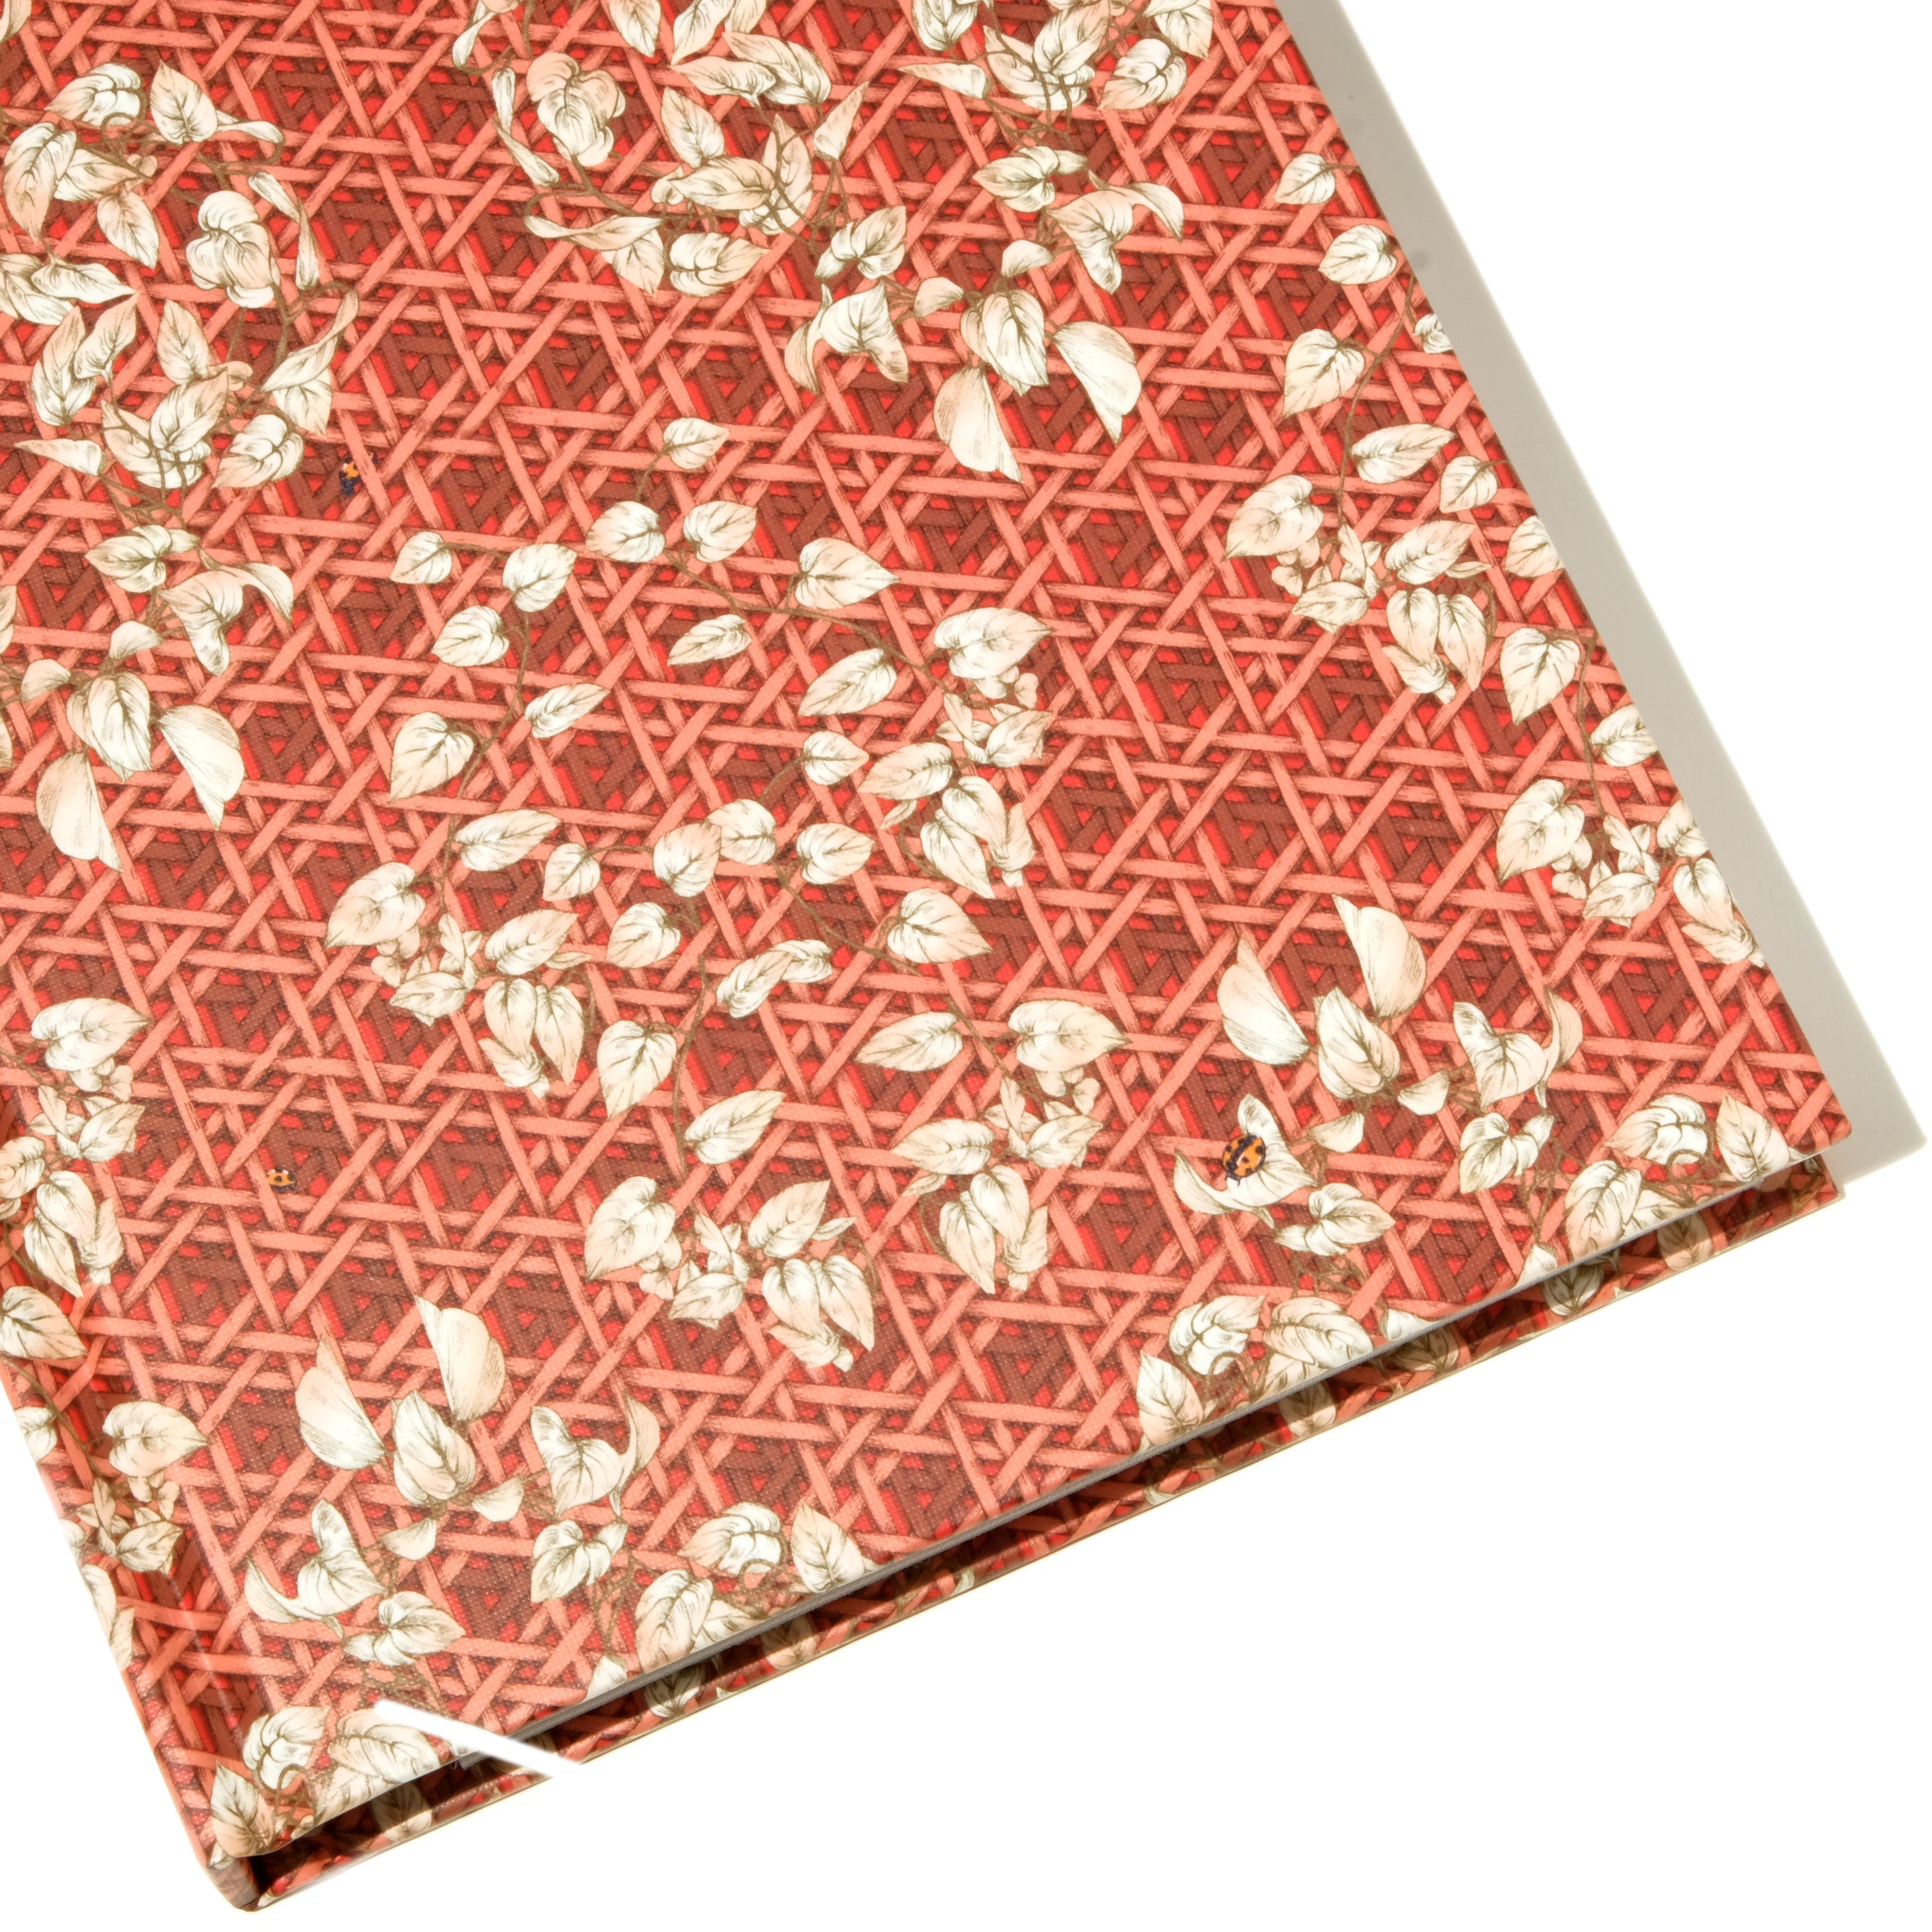 The Sketchbook A5 Enveloped in Rattan - Red